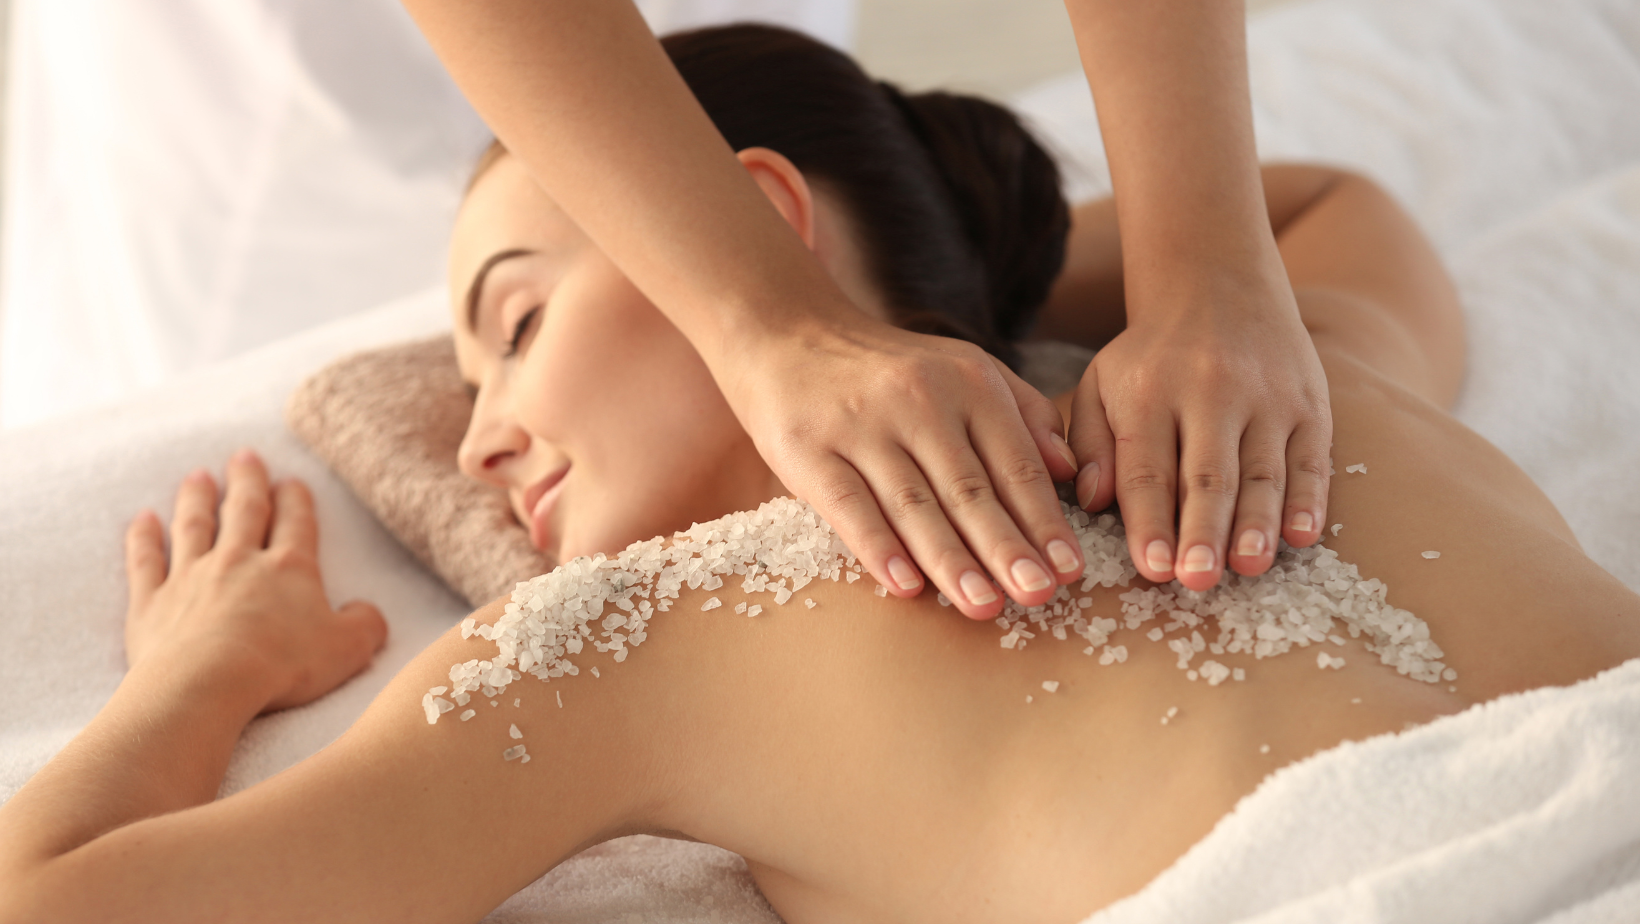 A relaxed woman is receiving a back treatment that includes a salt scrub and wonderful massage from a skilled Esthetician.